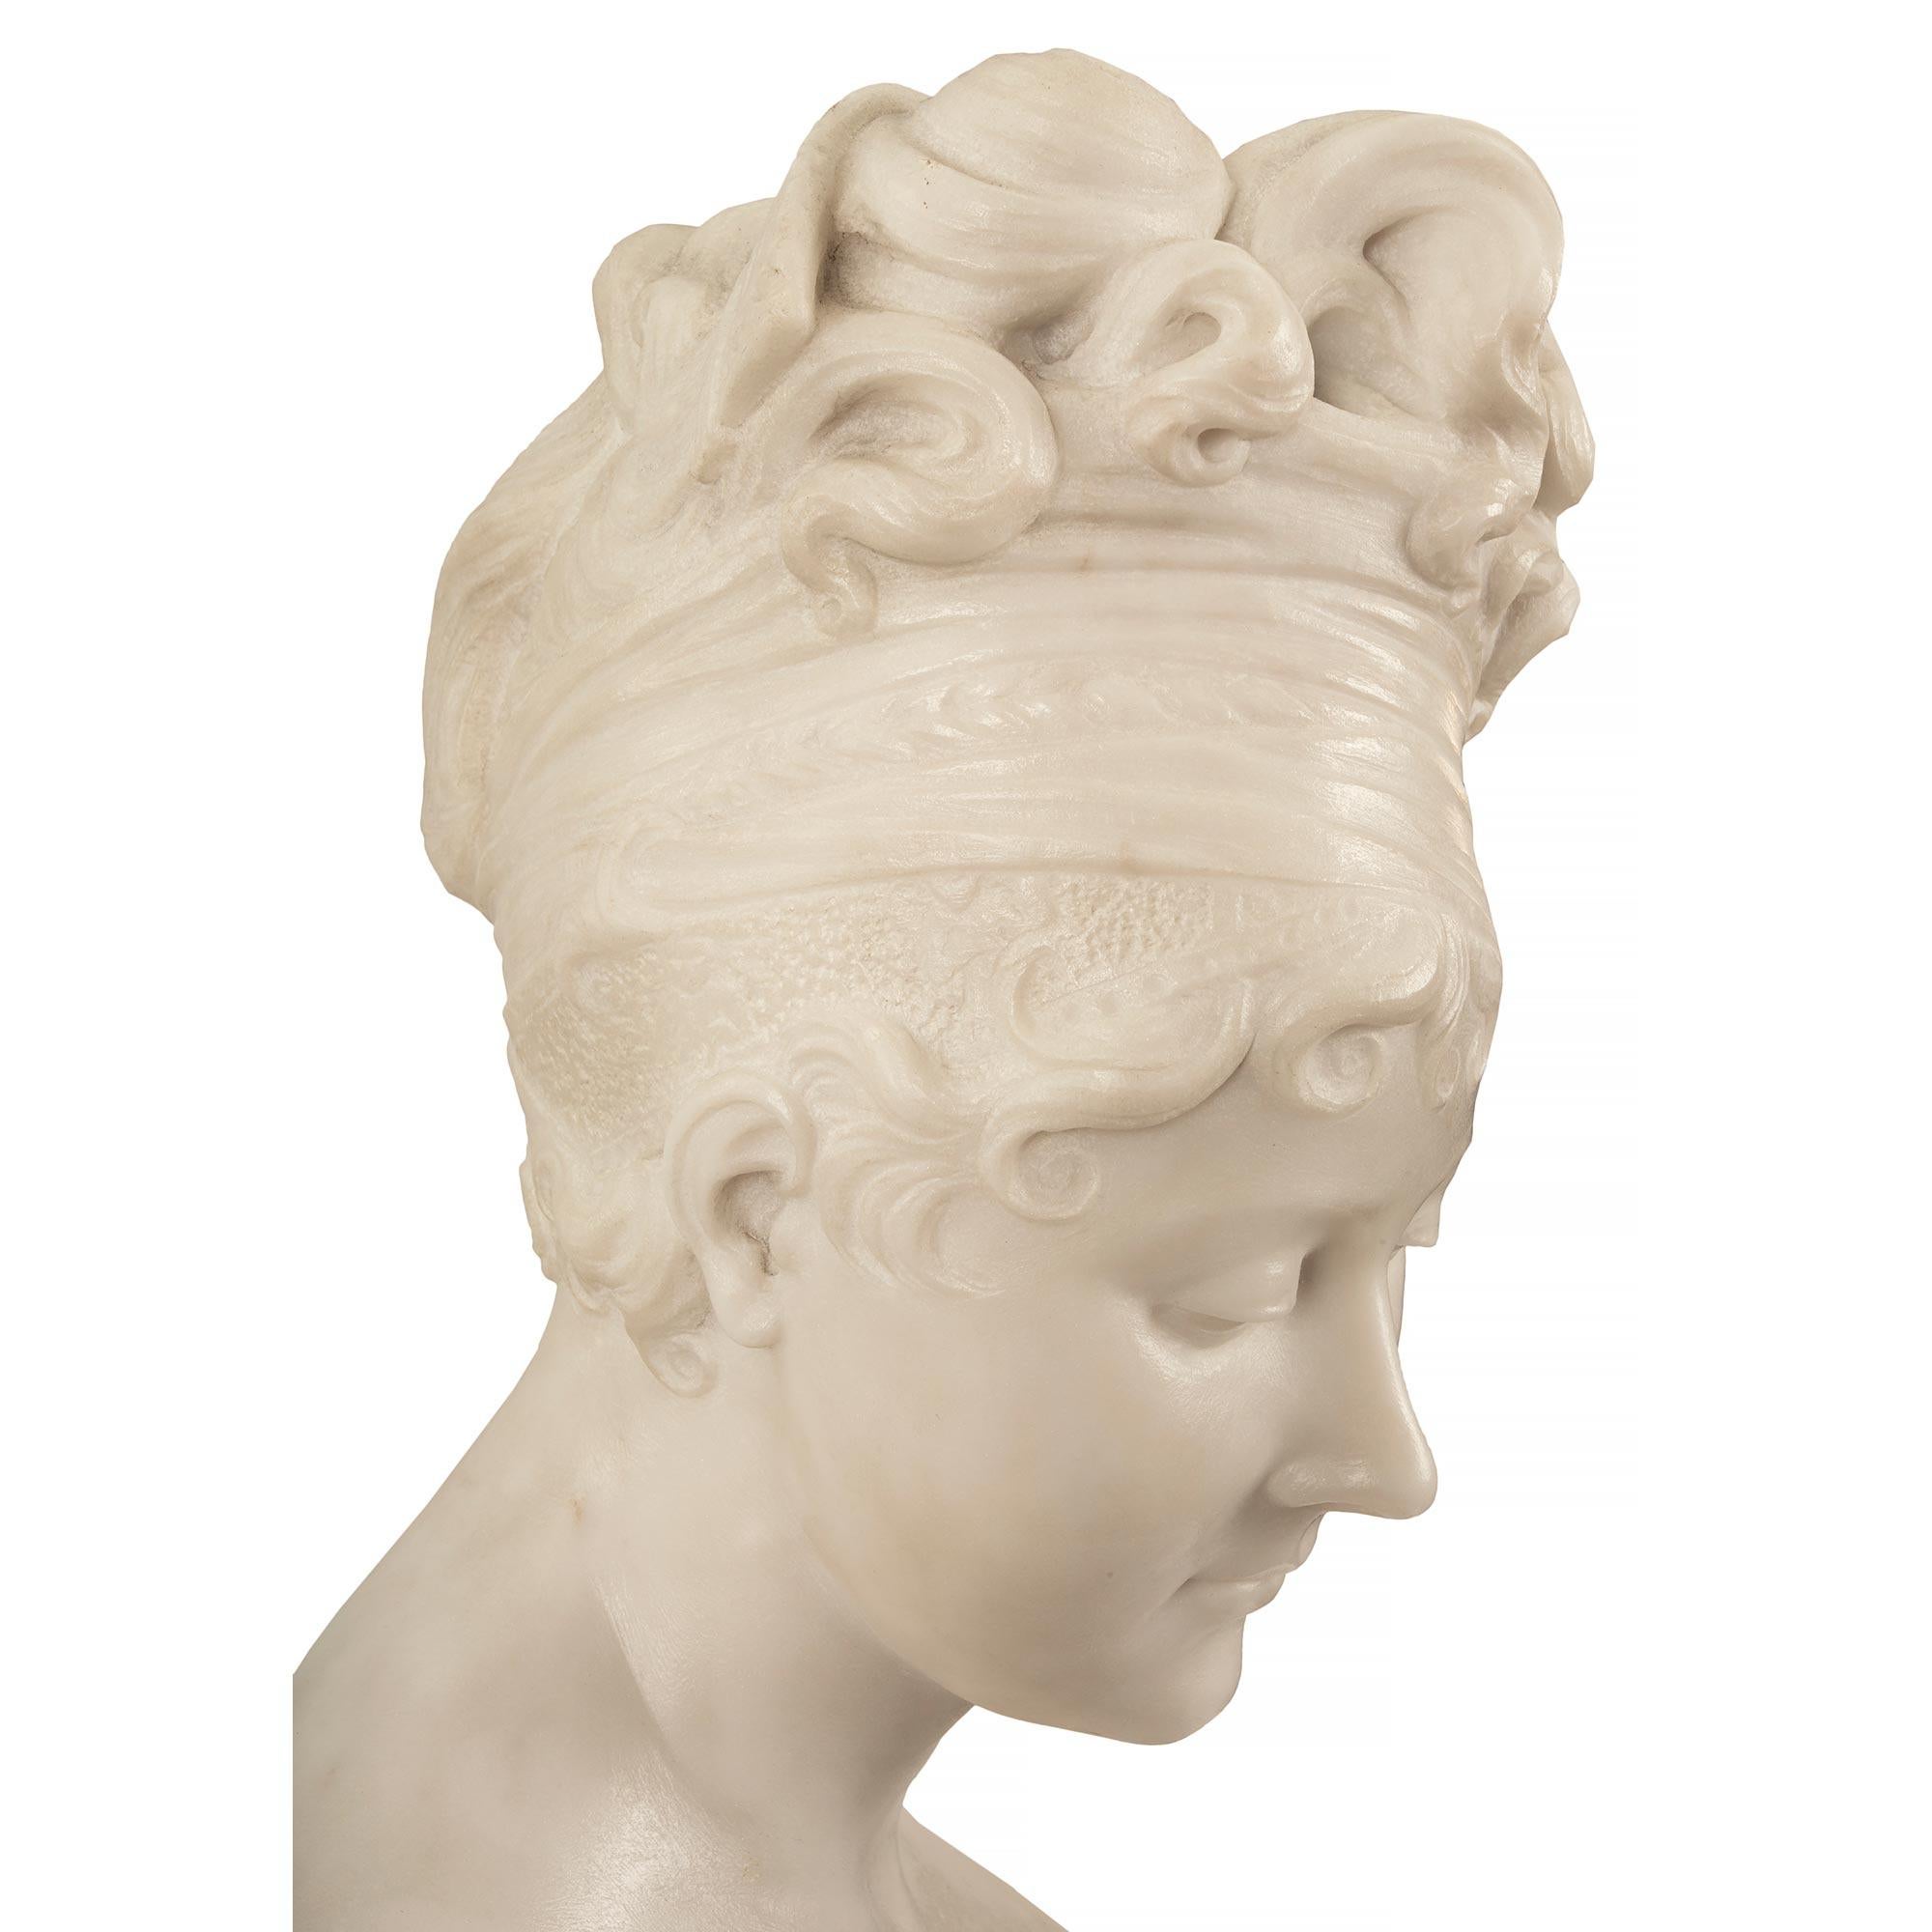 Italian 19th Century Neoclassical St. Carrara Marble Bust of Juliette Recamier For Sale 5